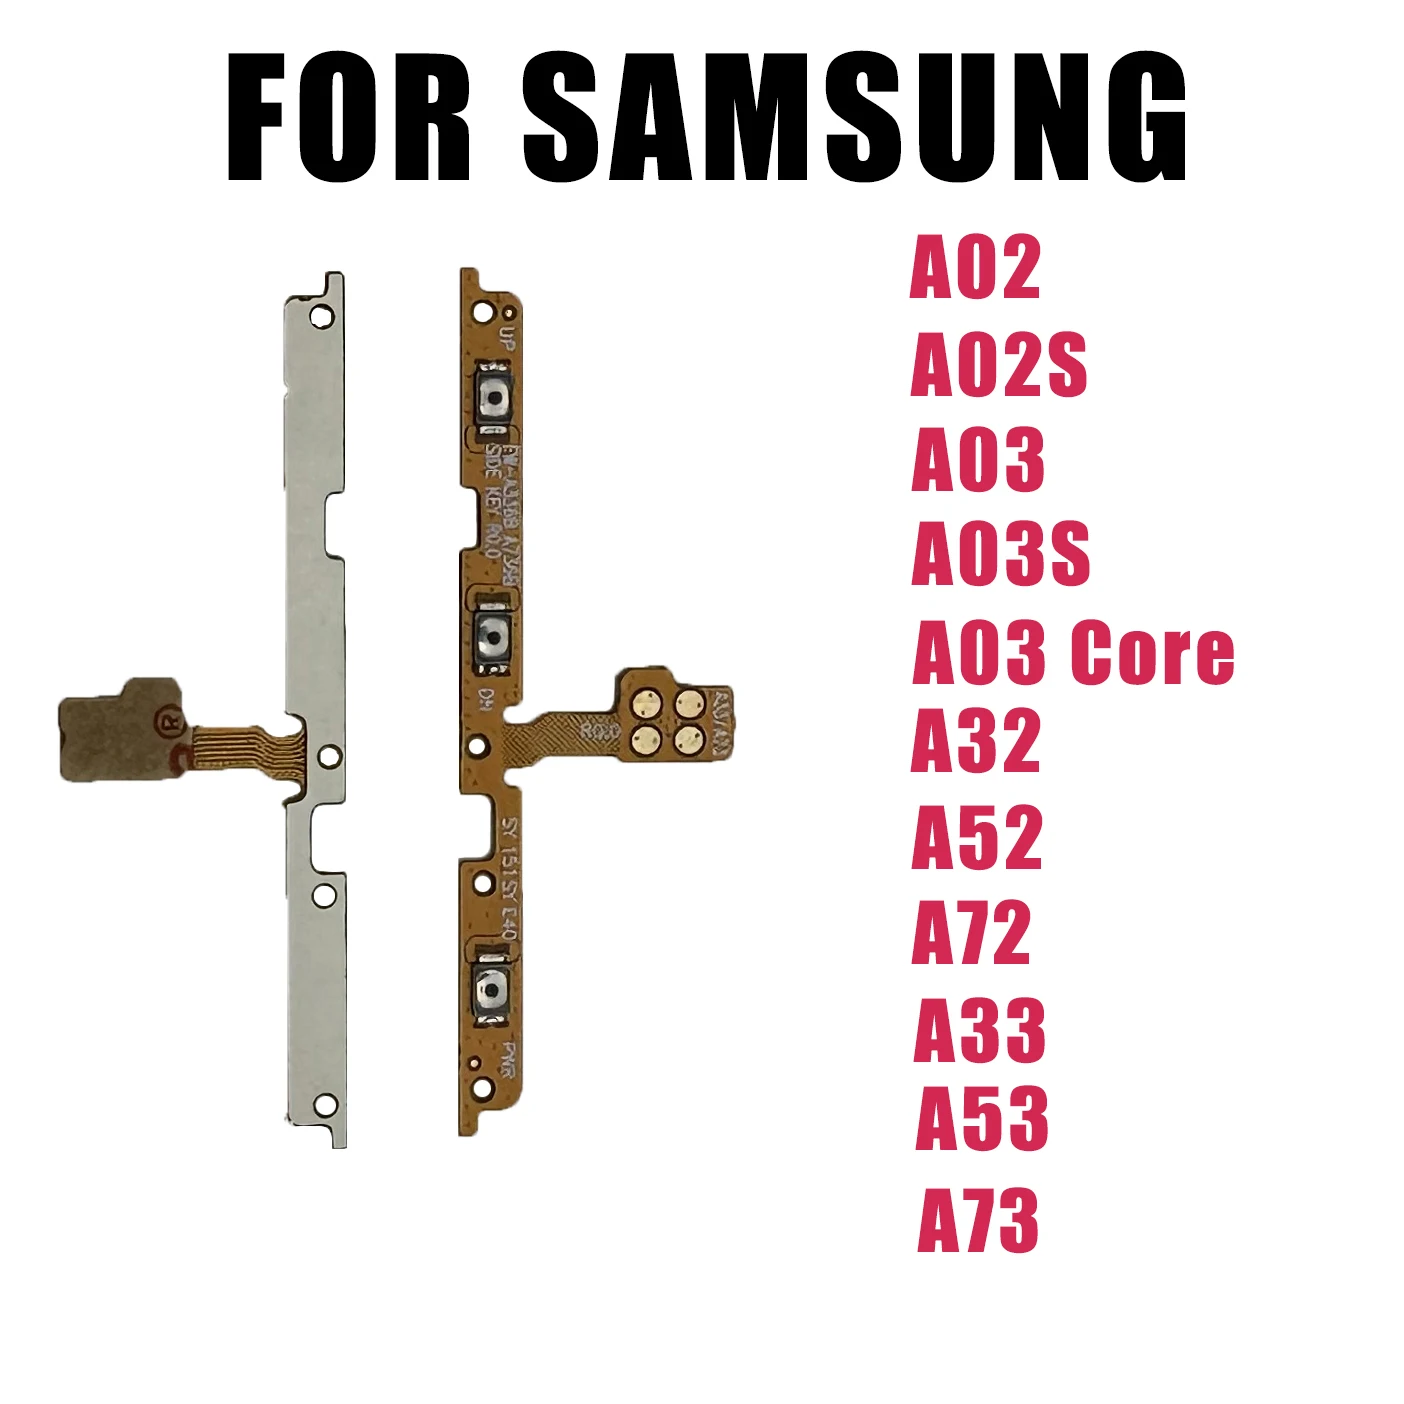 

Power On Off Volume Side Button Key Flex Cable For Samsung Galaxy A02 A02S A32 A52 A72 A03s A03 Core A13 A22 A33 A53 A73 4G 5G